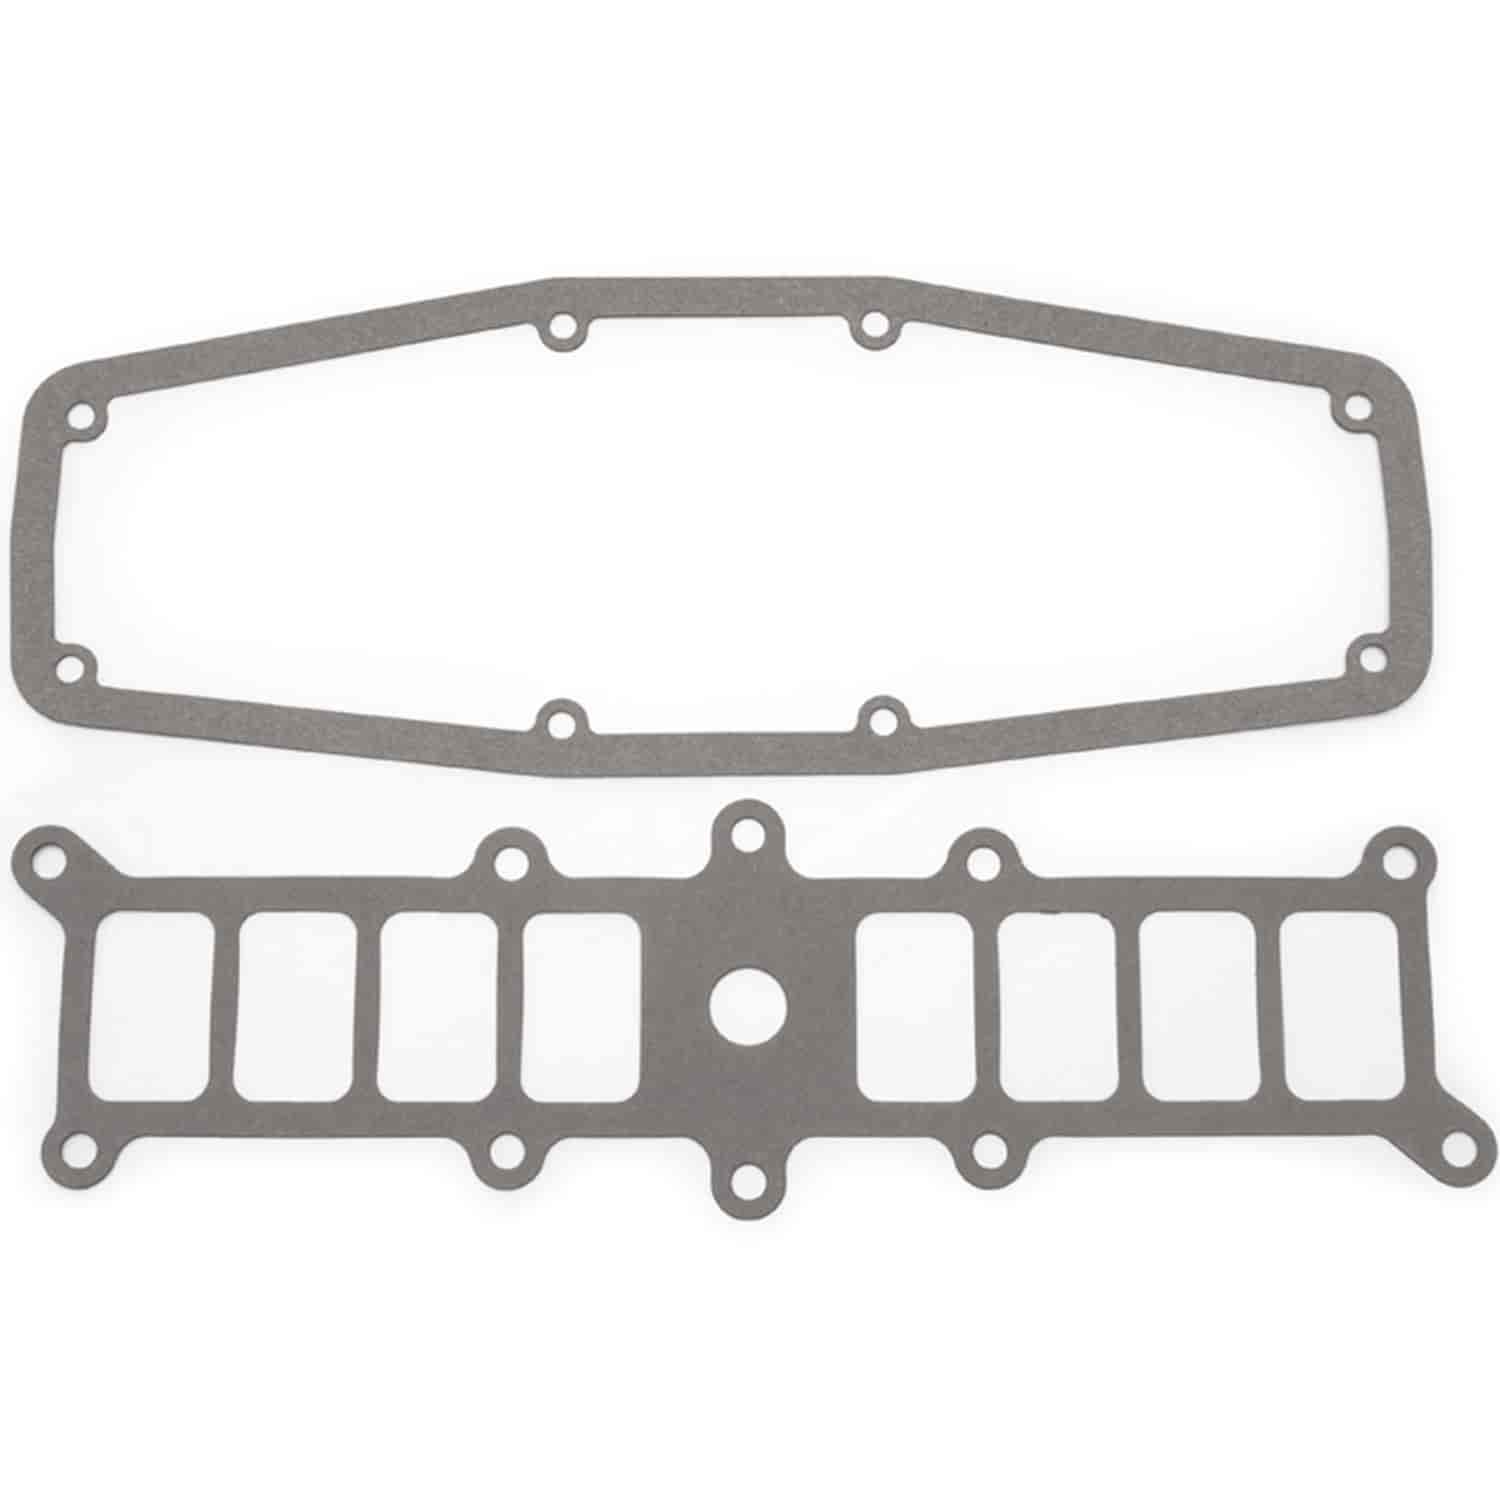 Performer RPM Intake Manifold Gaskets for 1986-1995 Ford